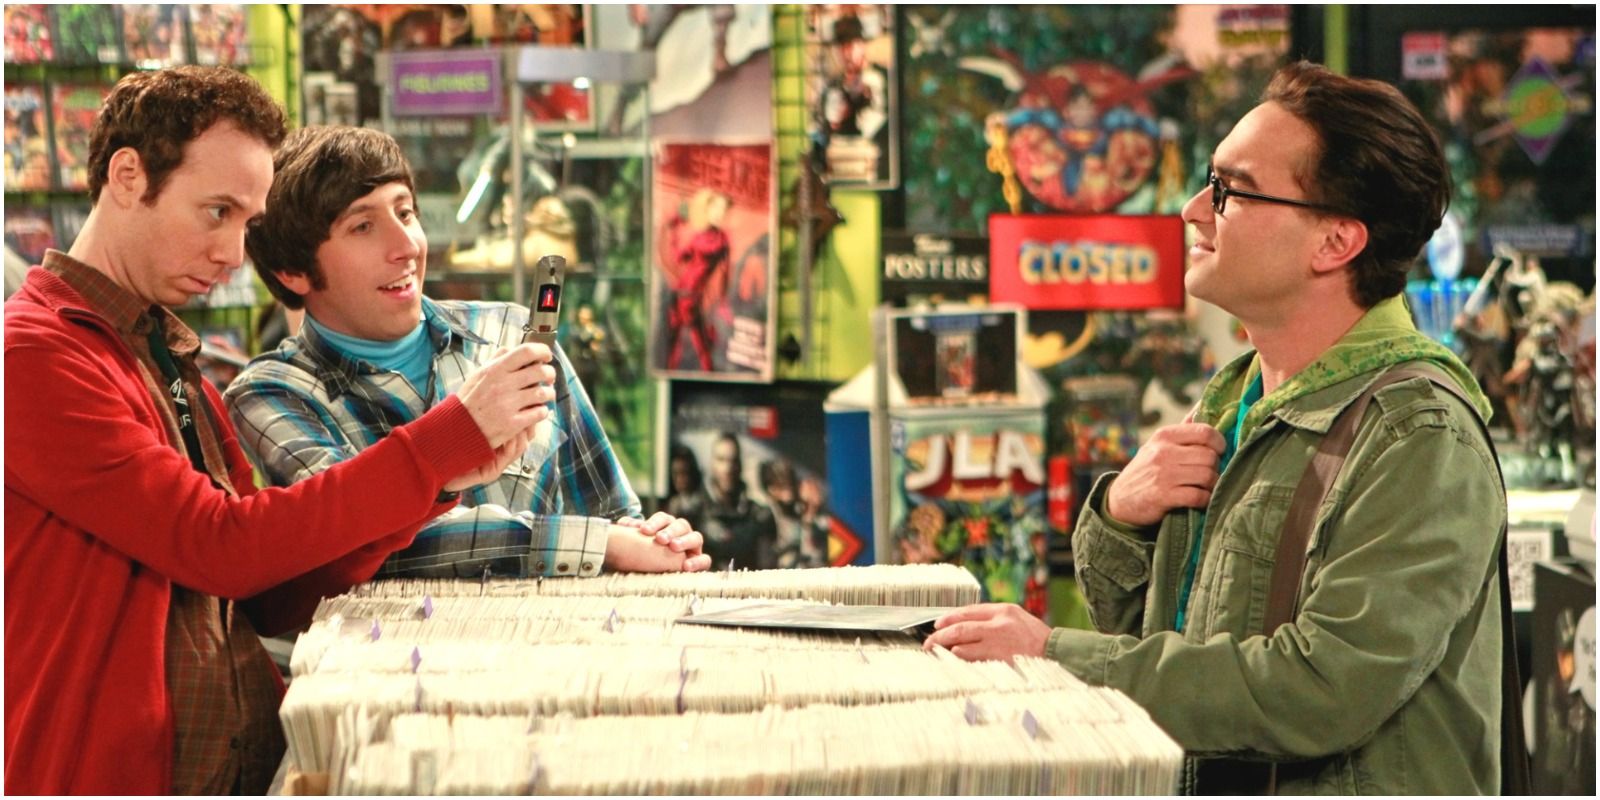 Stuart and Howard taking a photo of Leonard at the comic book store from the Big Bang Theory